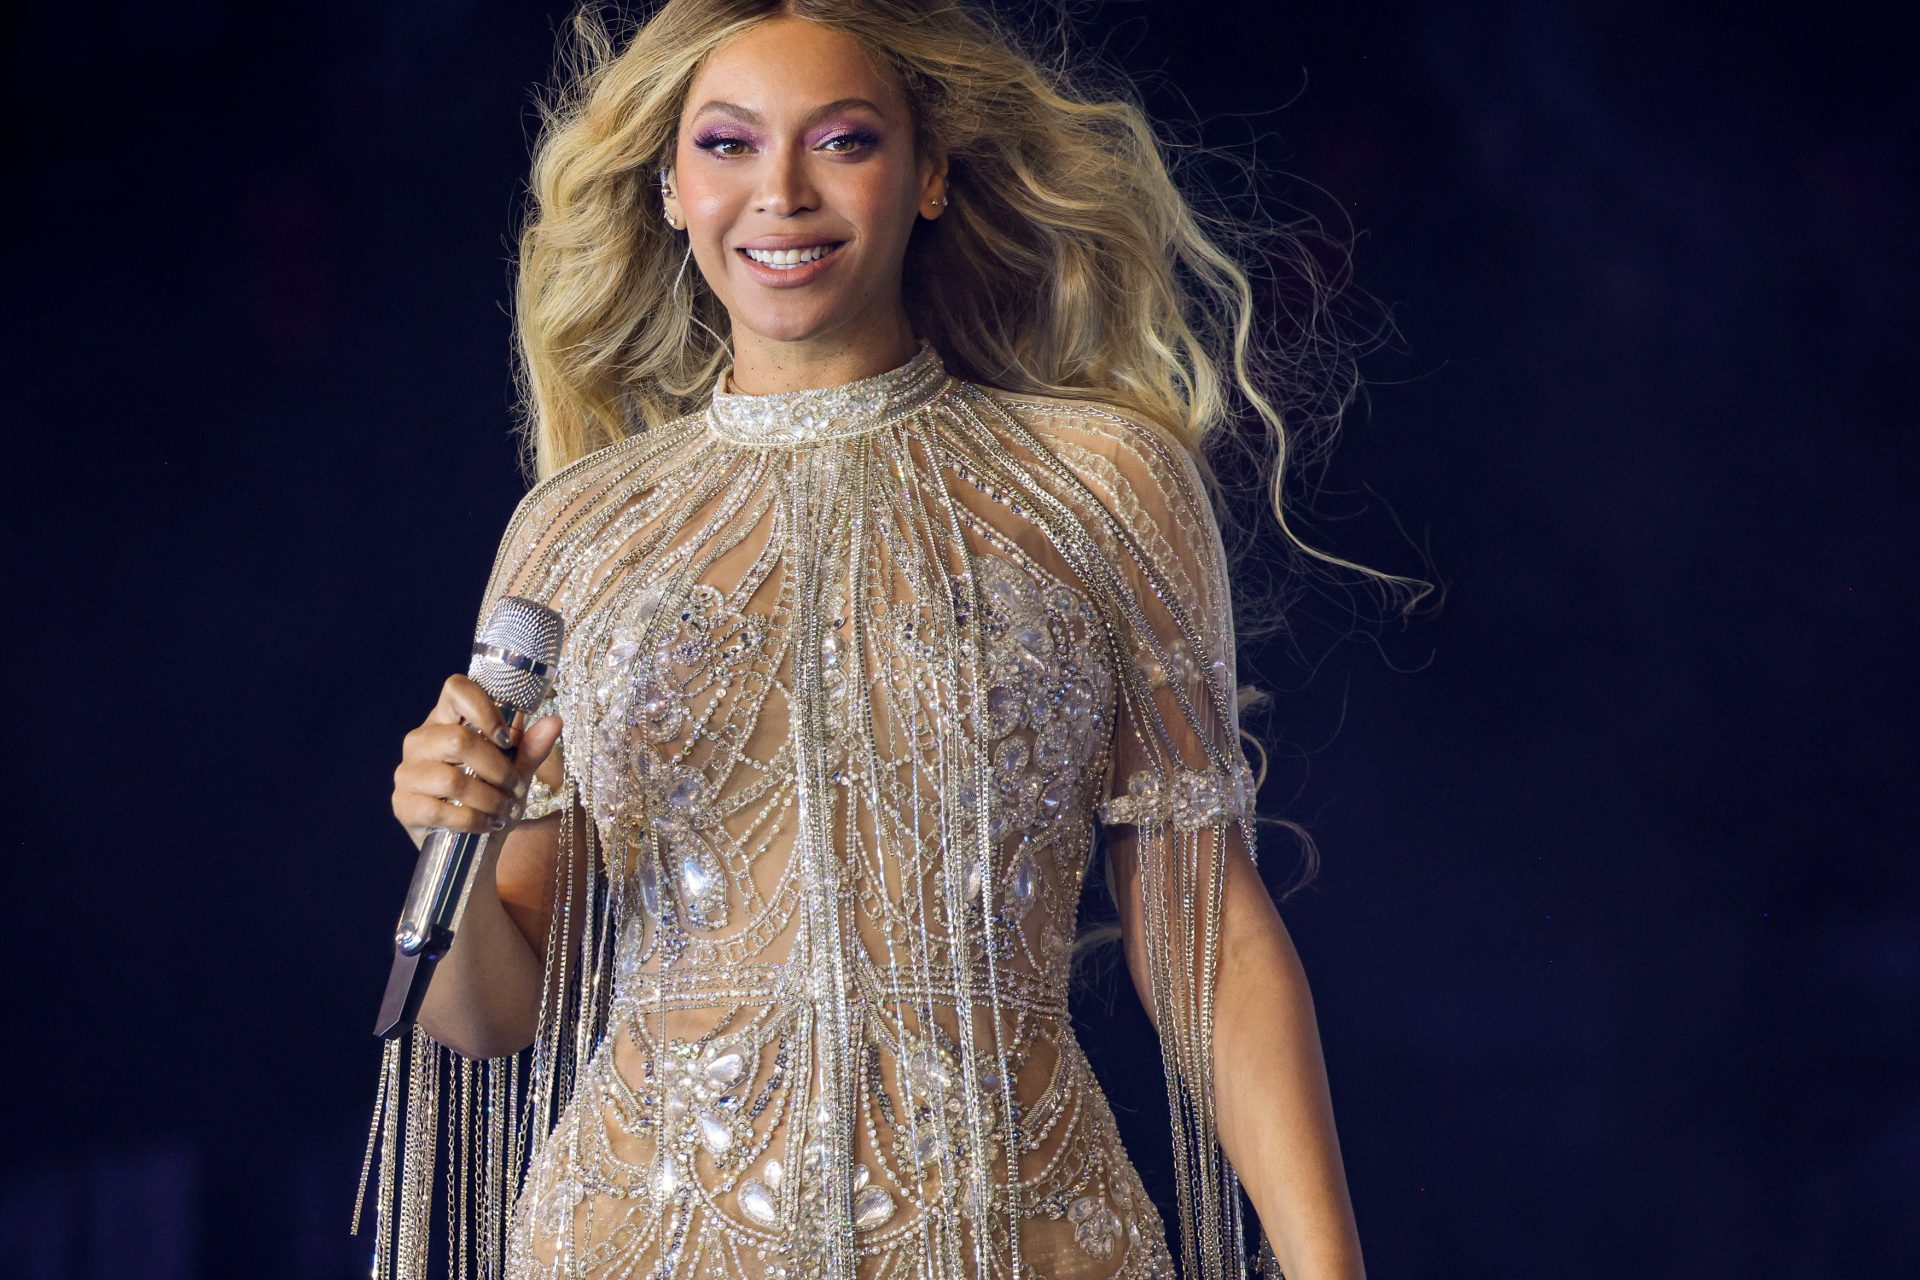 Beyoncé was initially hesitant about her daughter's stage debut